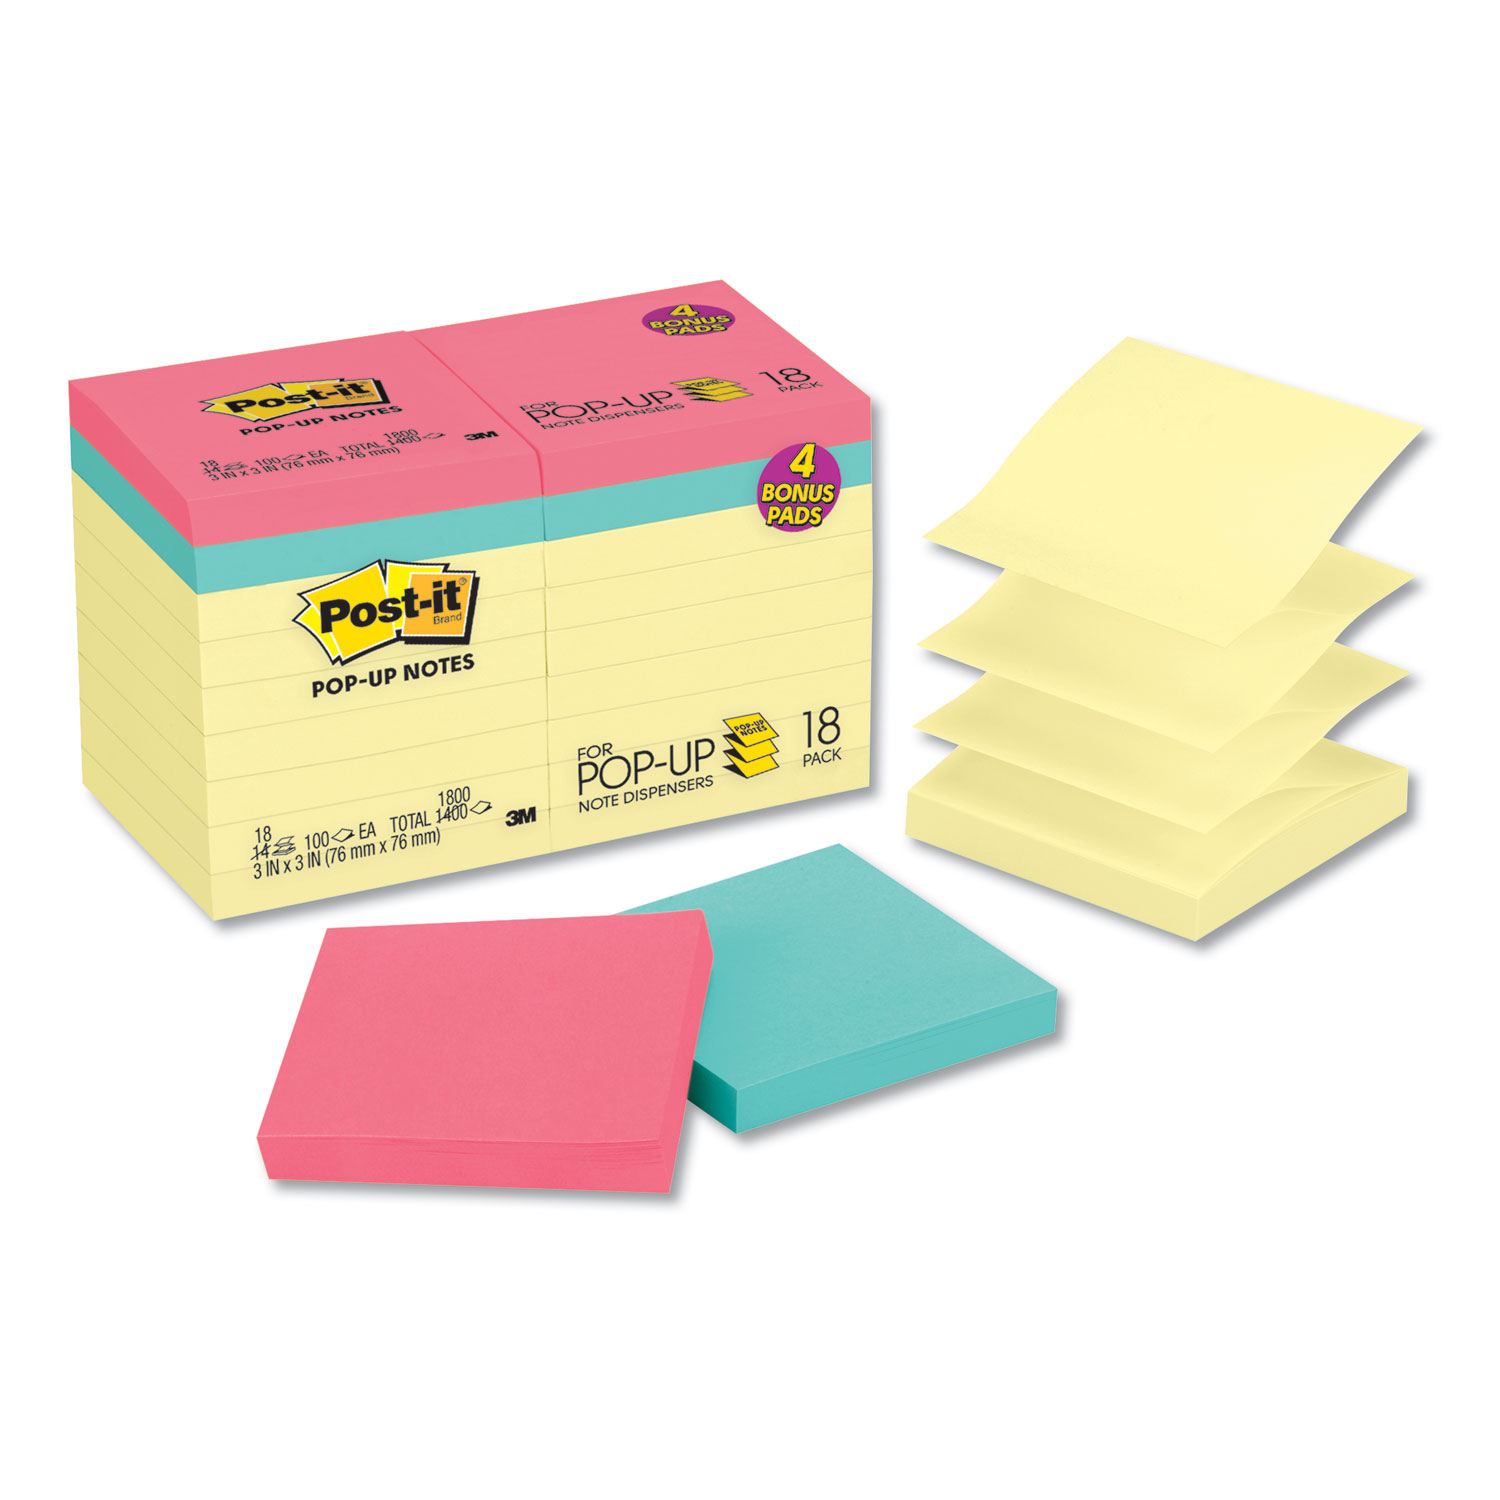  Post-it Pop-up Notes R330-14-4B Original Pop-up Notes Value Pack, 3 x 3, Canary/Cape Town, 100-Sheet, 18/Pack (MMMR330144B) 